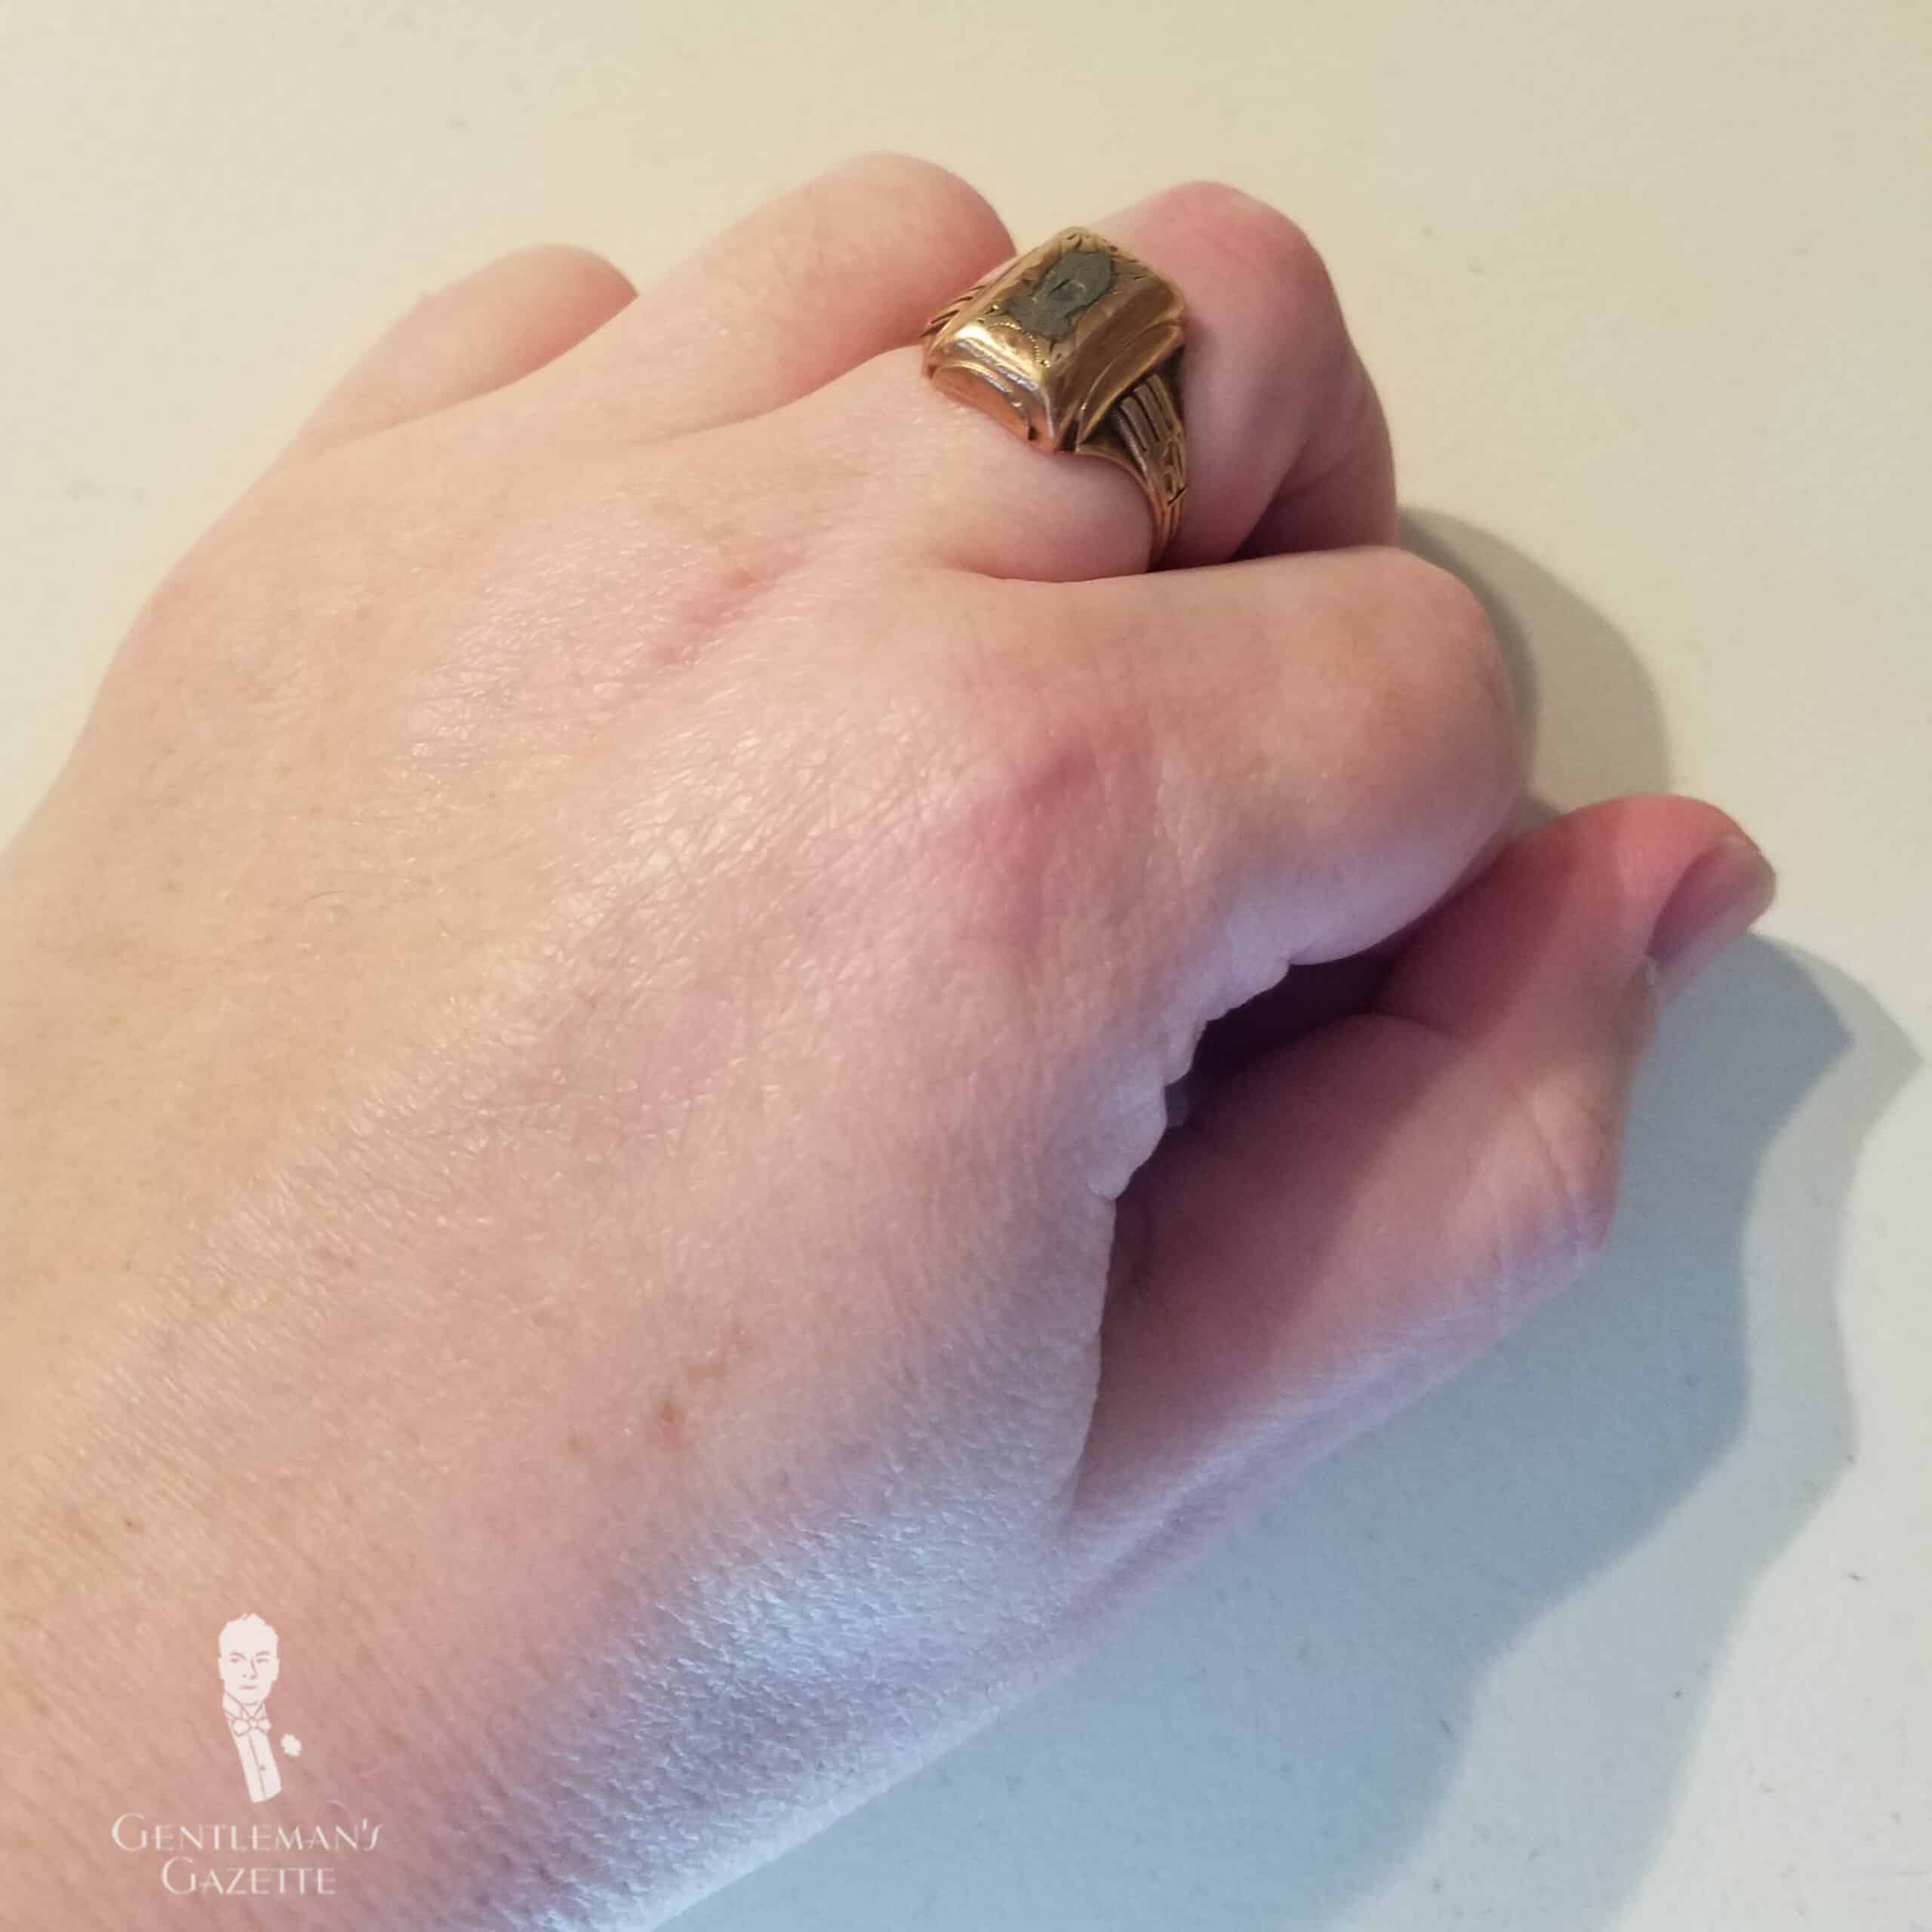 A hand with a copper ring on the middle finger